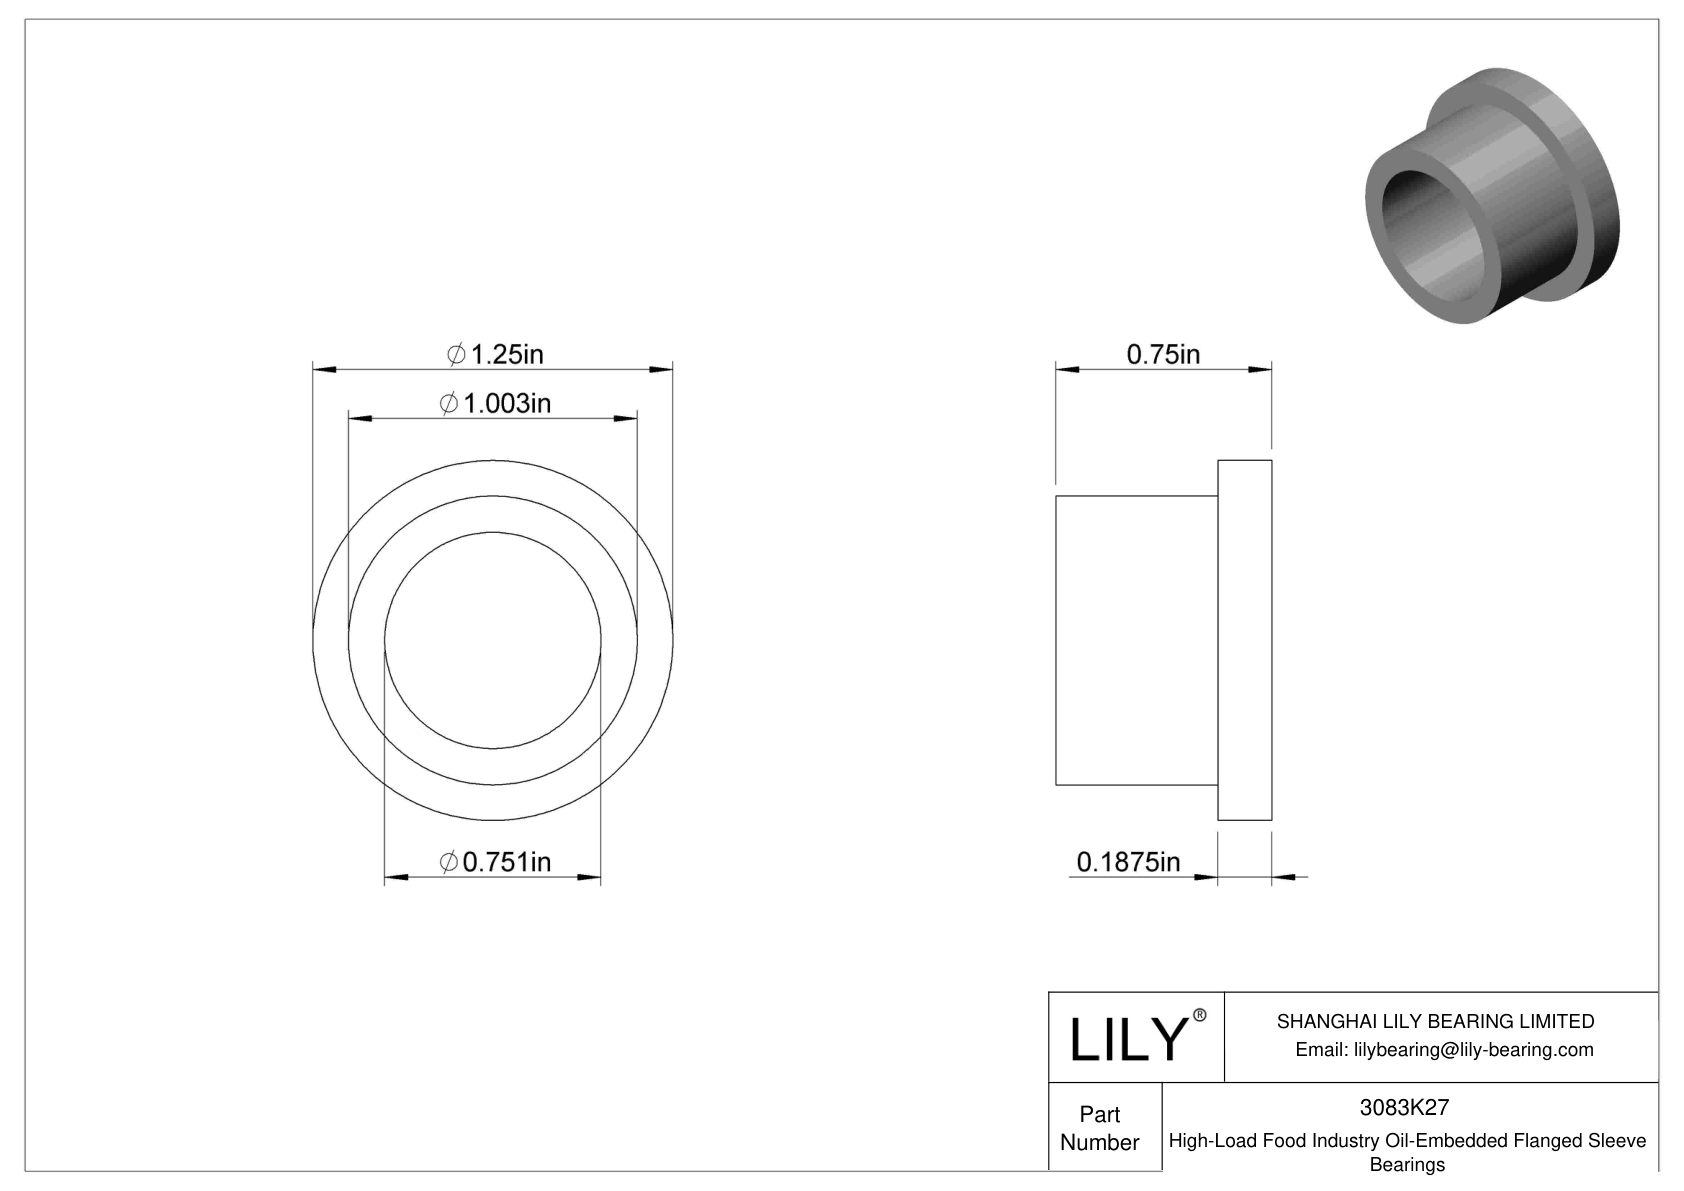 DAIDKCH High-Load Food Industry Oil-Embedded Flanged Sleeve Bearings cad drawing